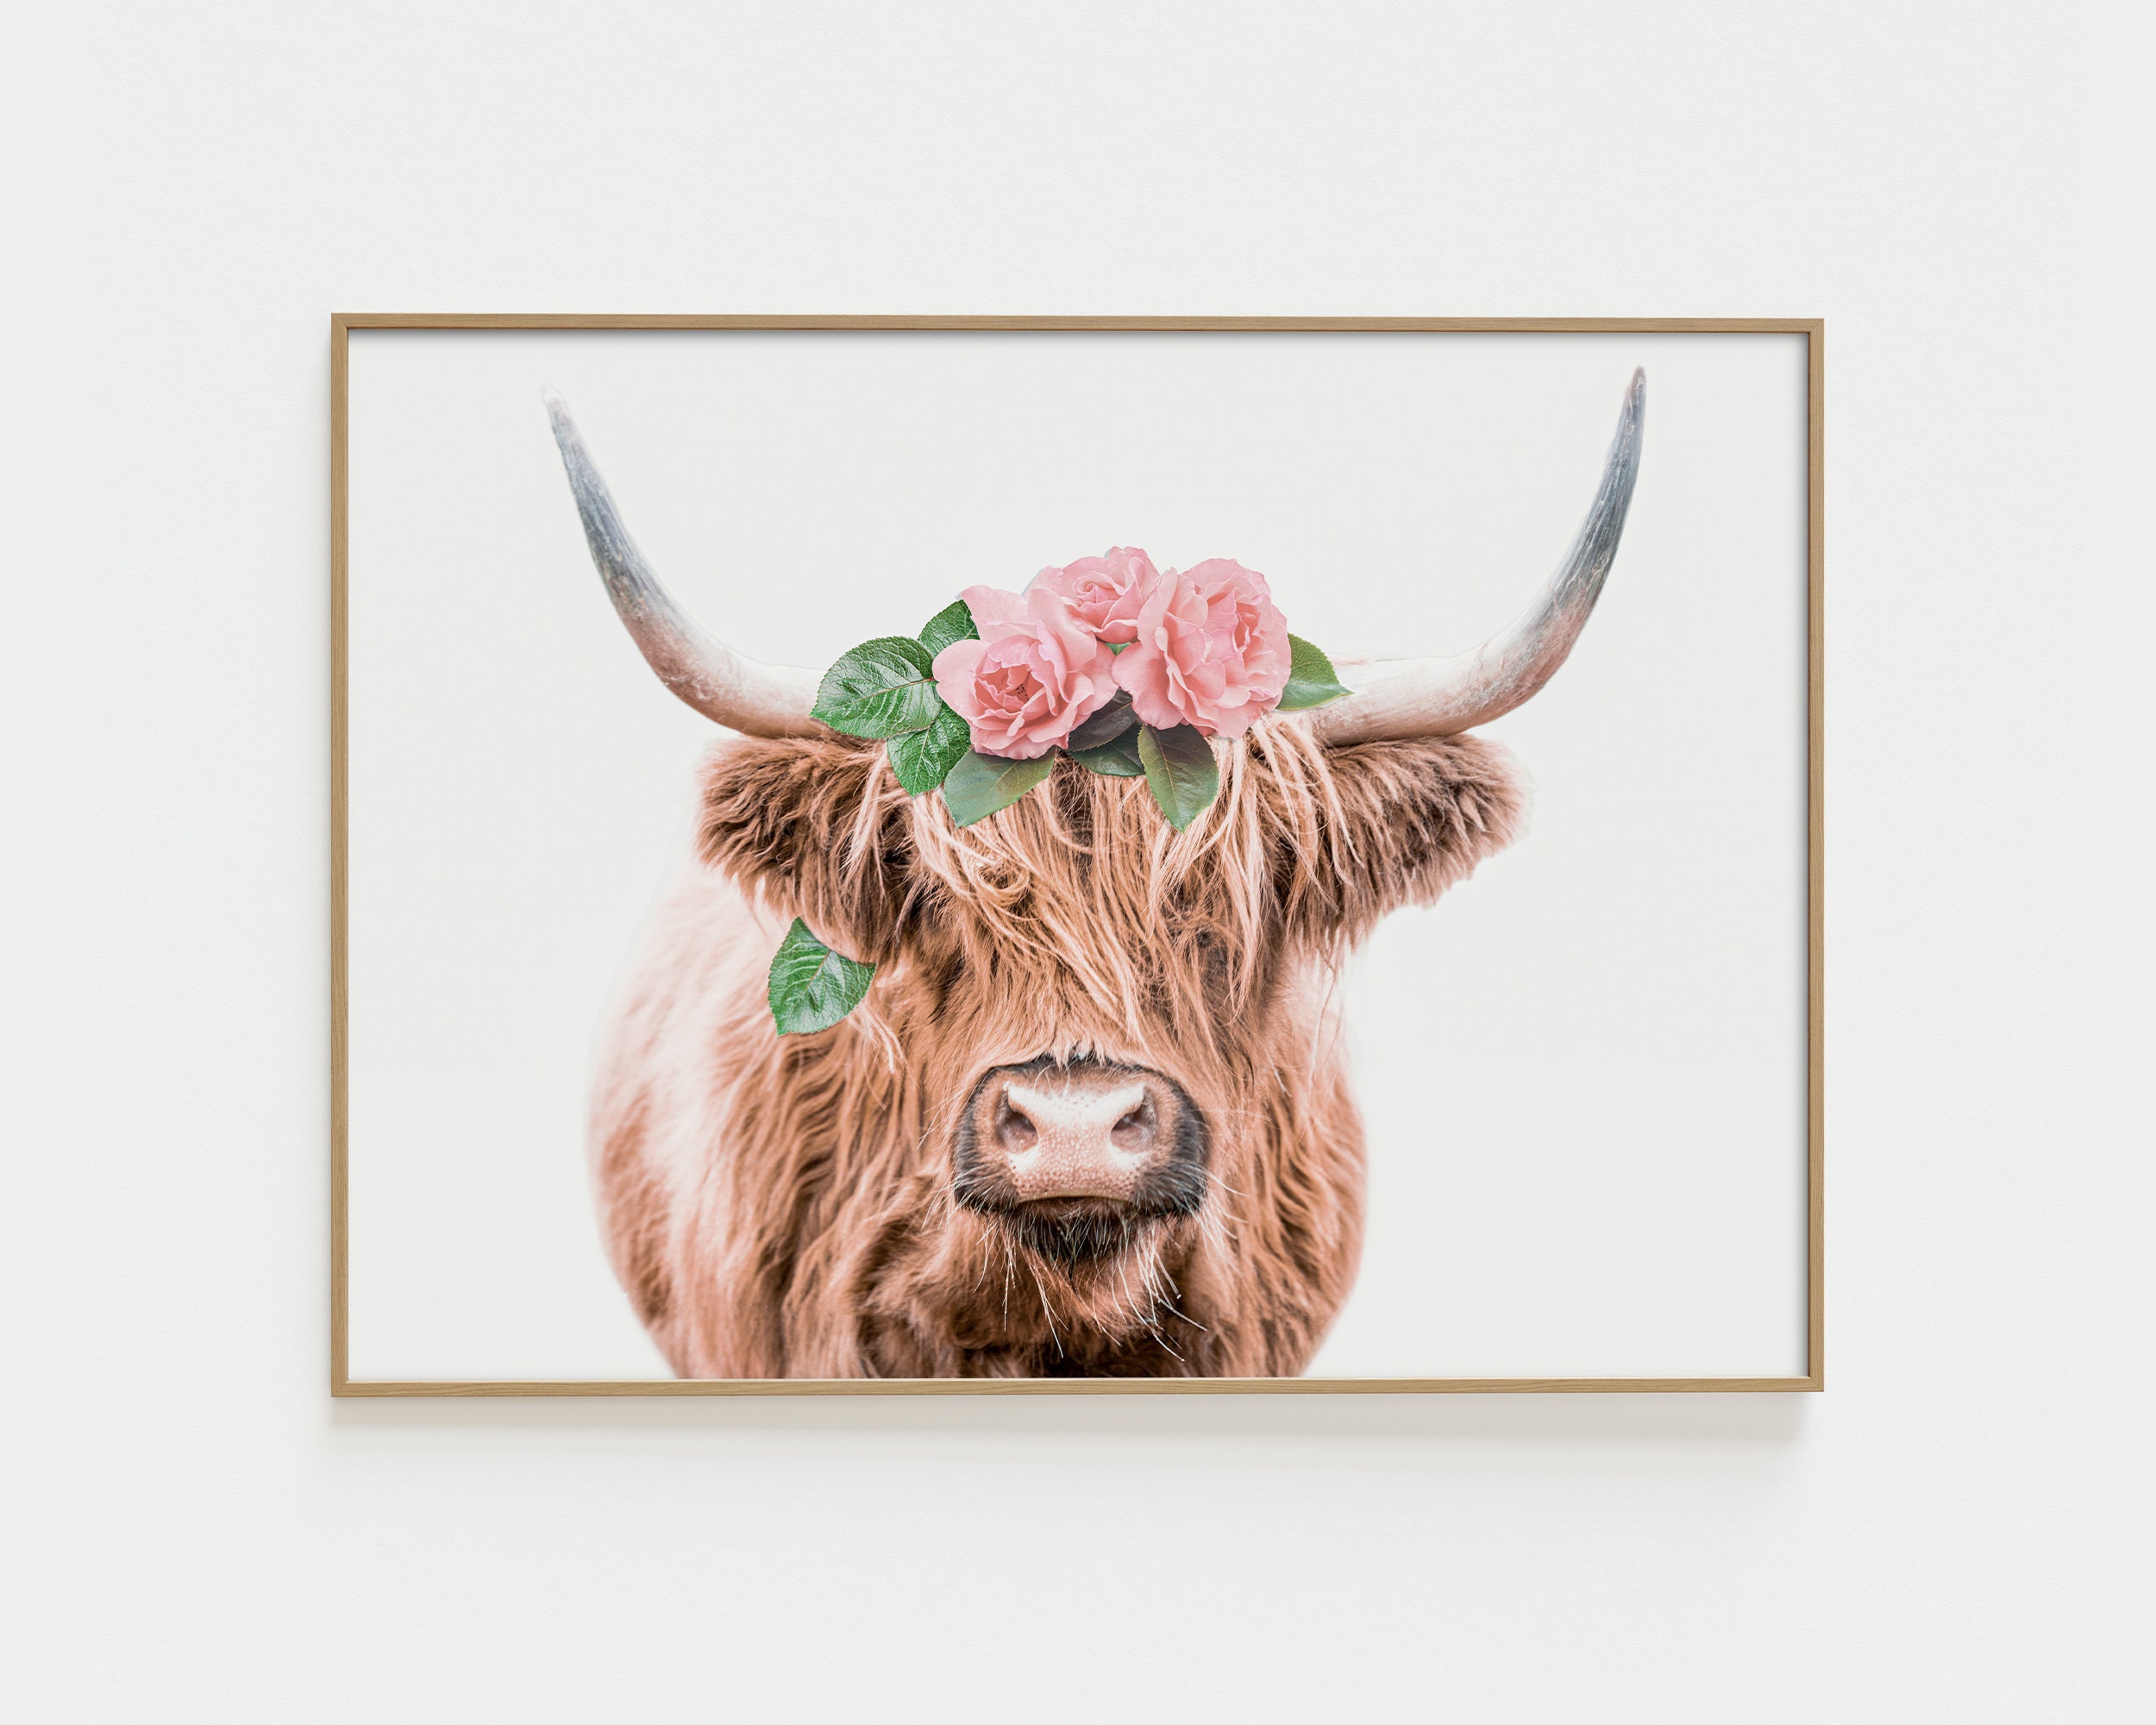 PixonSign Highland Cow Canvas Print Framed Wall Art, 24x36 inches